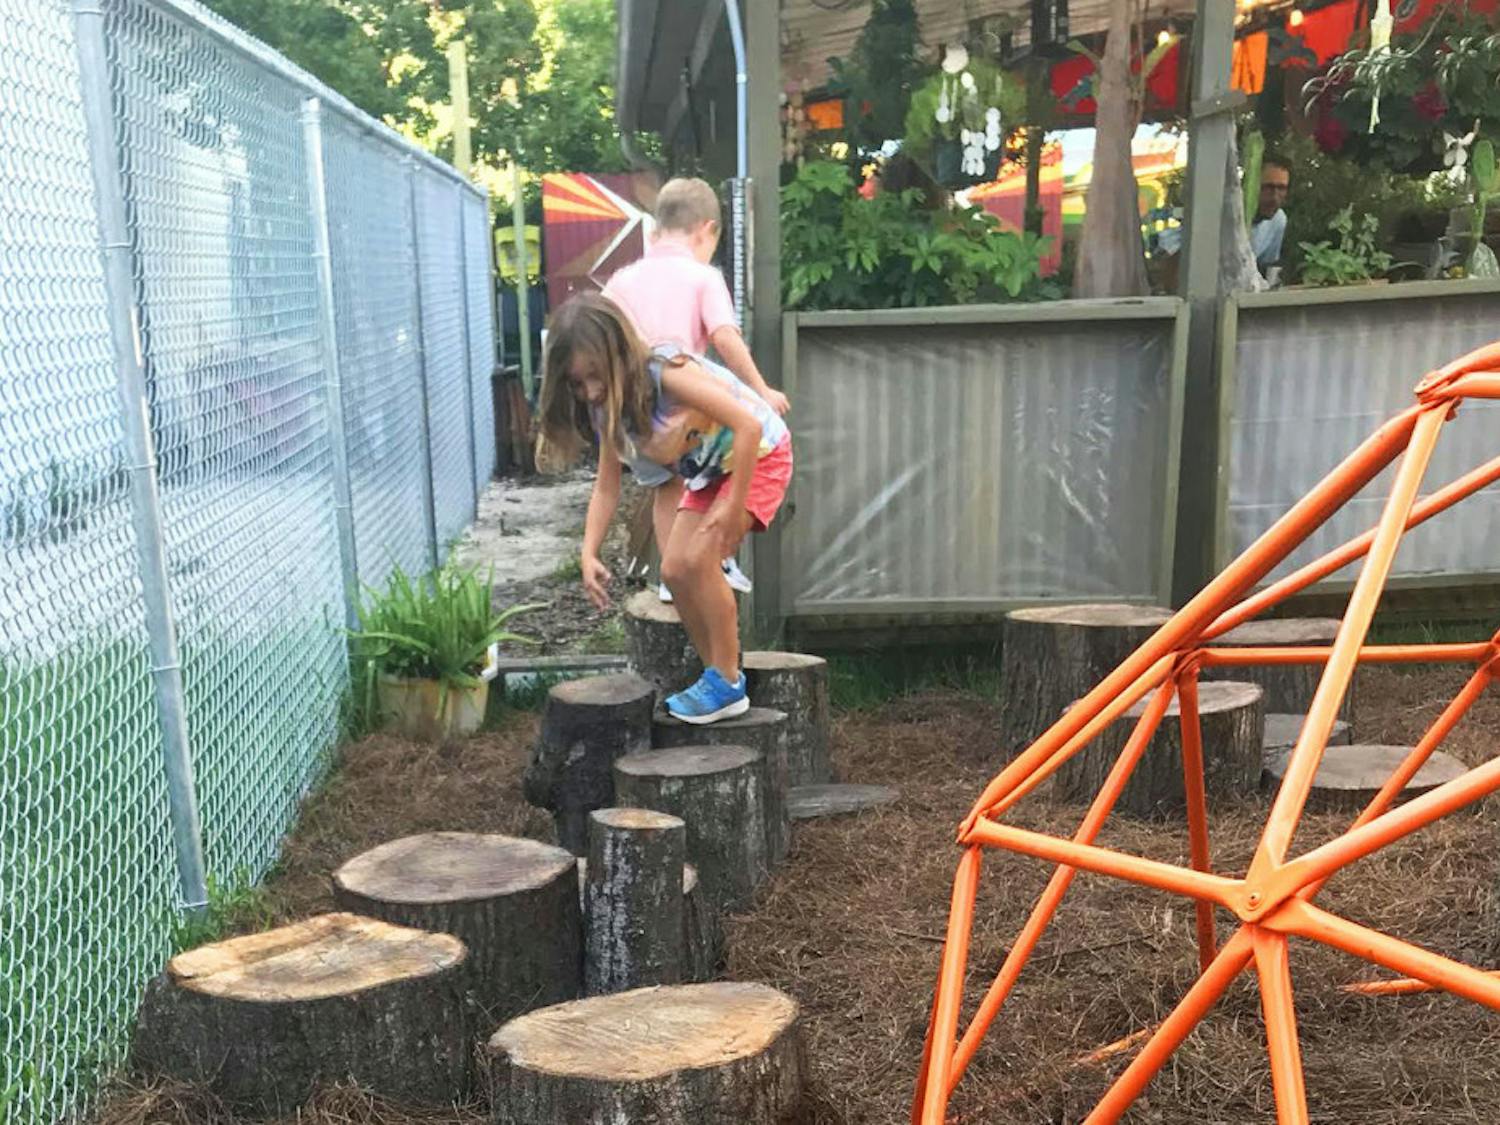 Children play on new tree stumps next to a repurposed orange dome that survived a fire at Satchel's Pizza almost two years ago.